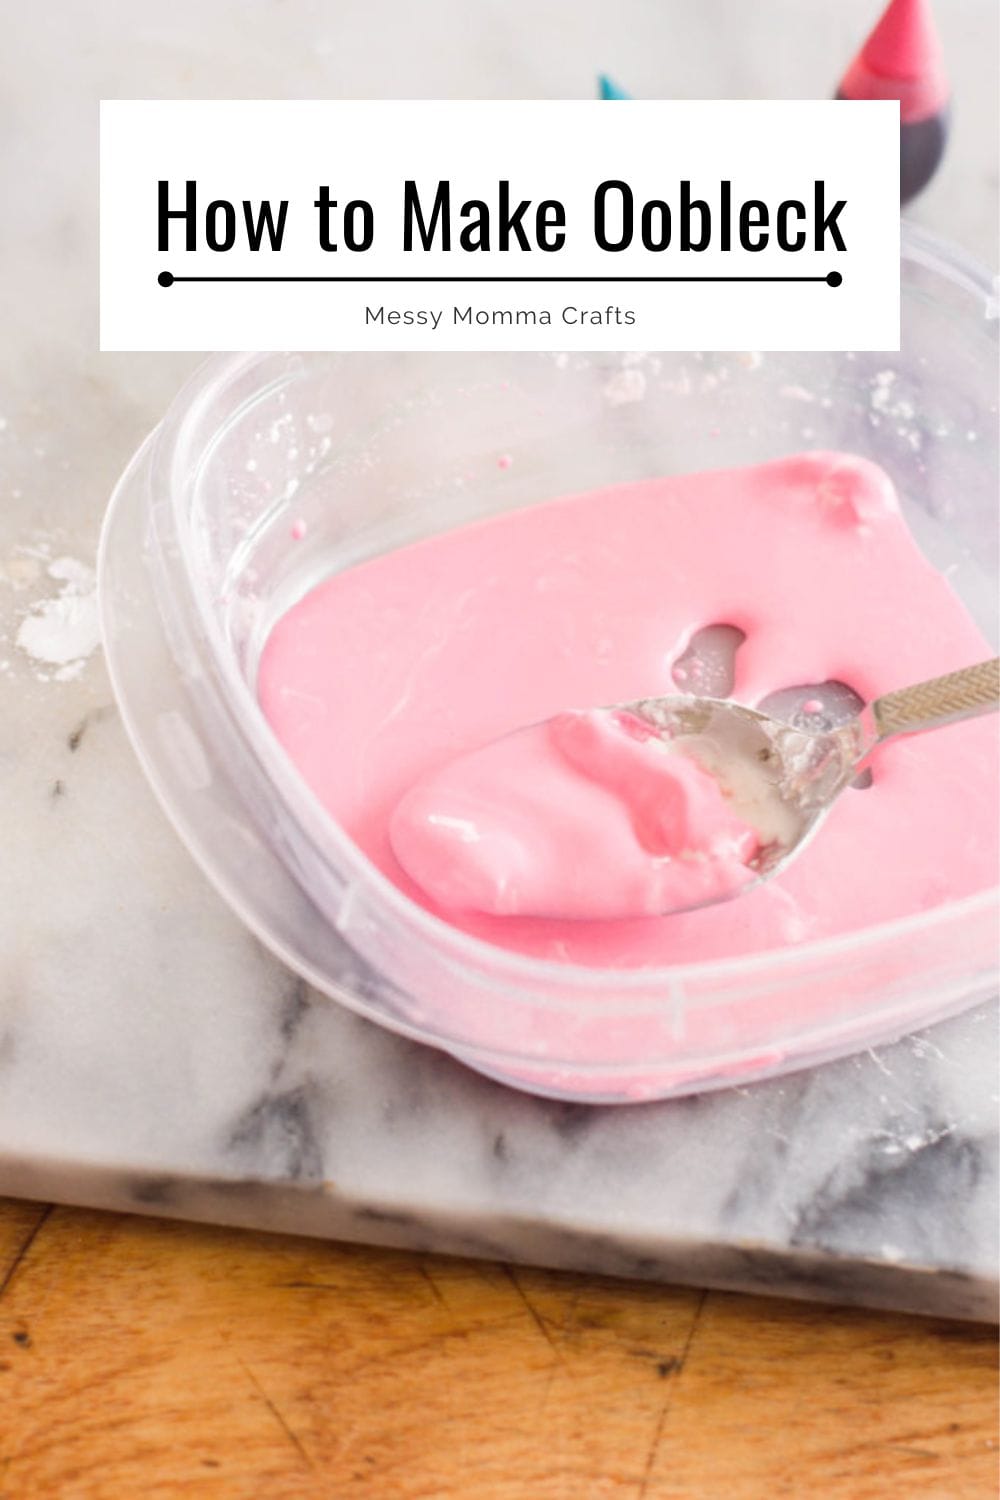 How to make oobleck with pink slime in a plastic tub with a spoon.